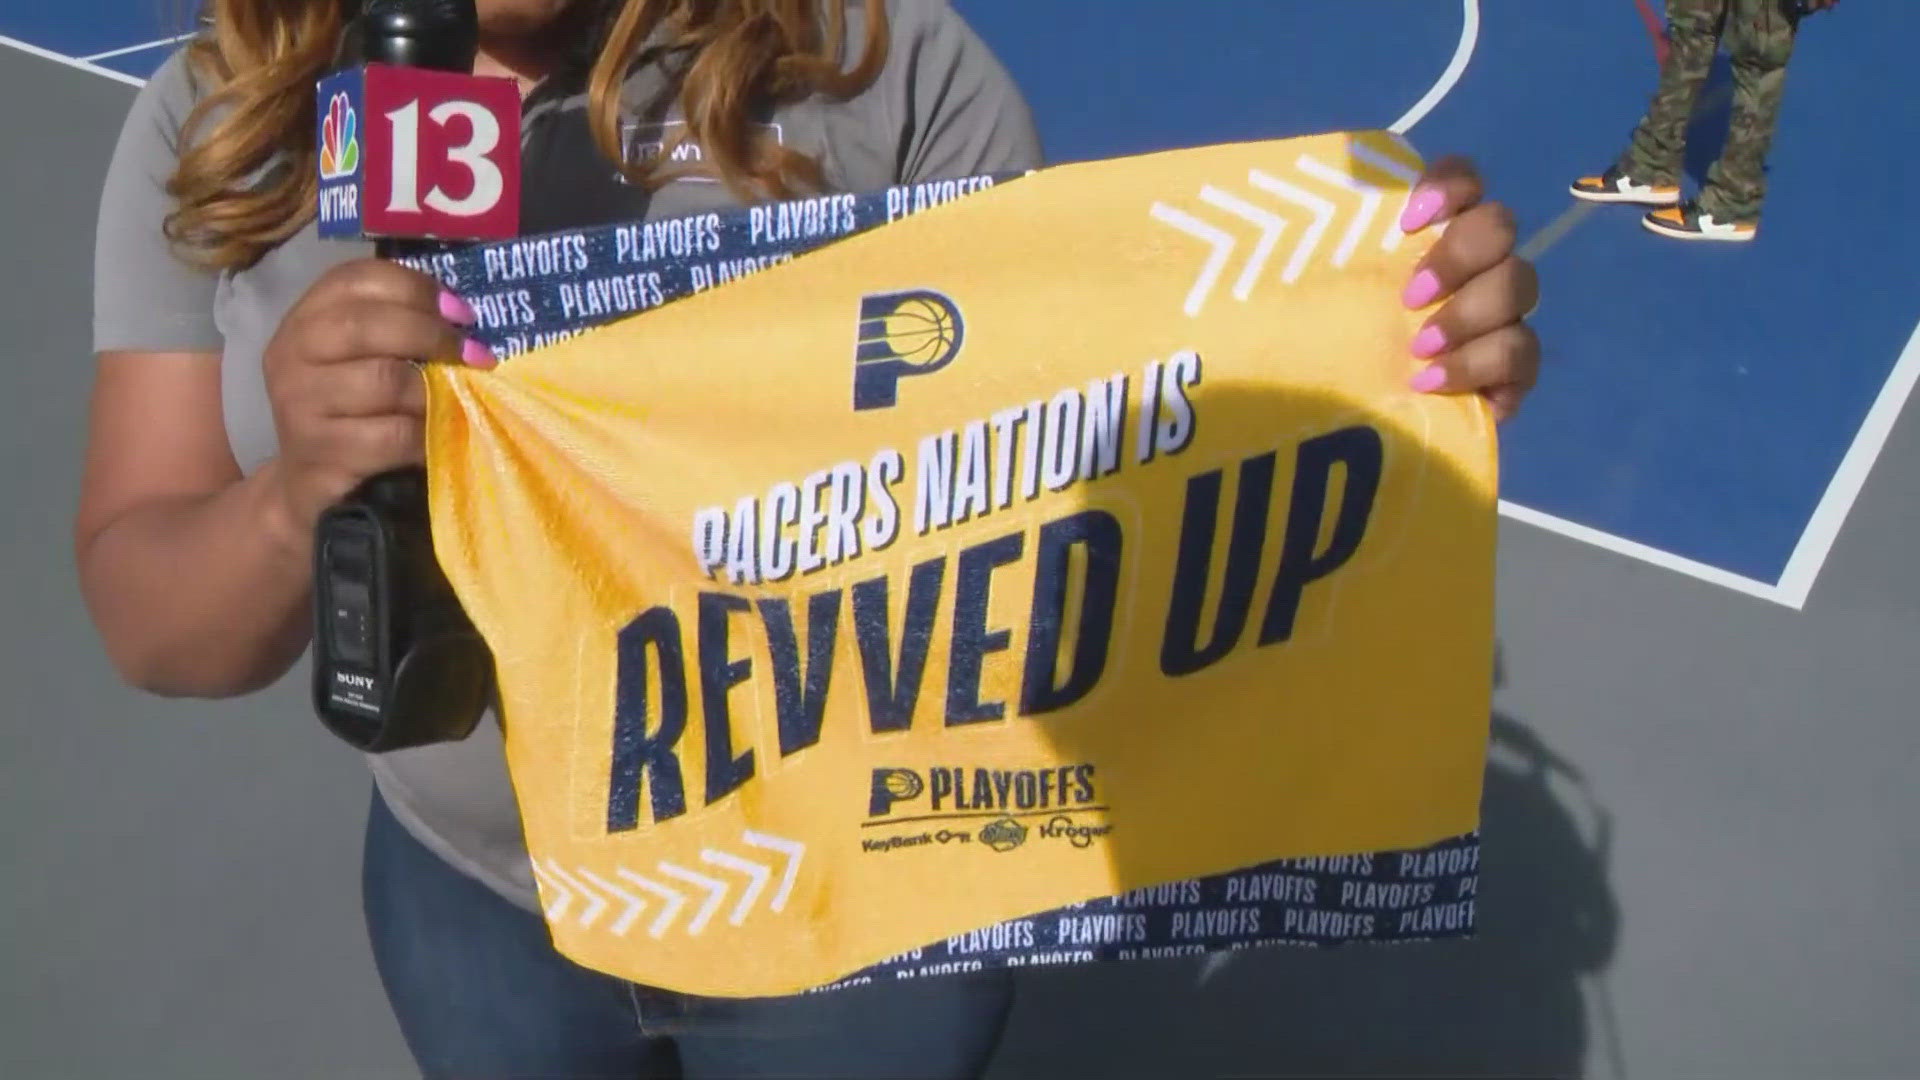 13News reporter Logan Gay reports from the Bicentennial Unity Plaza where fans are excited for Thursday night's Pacers playoff game against the Milwaukee Bucks.